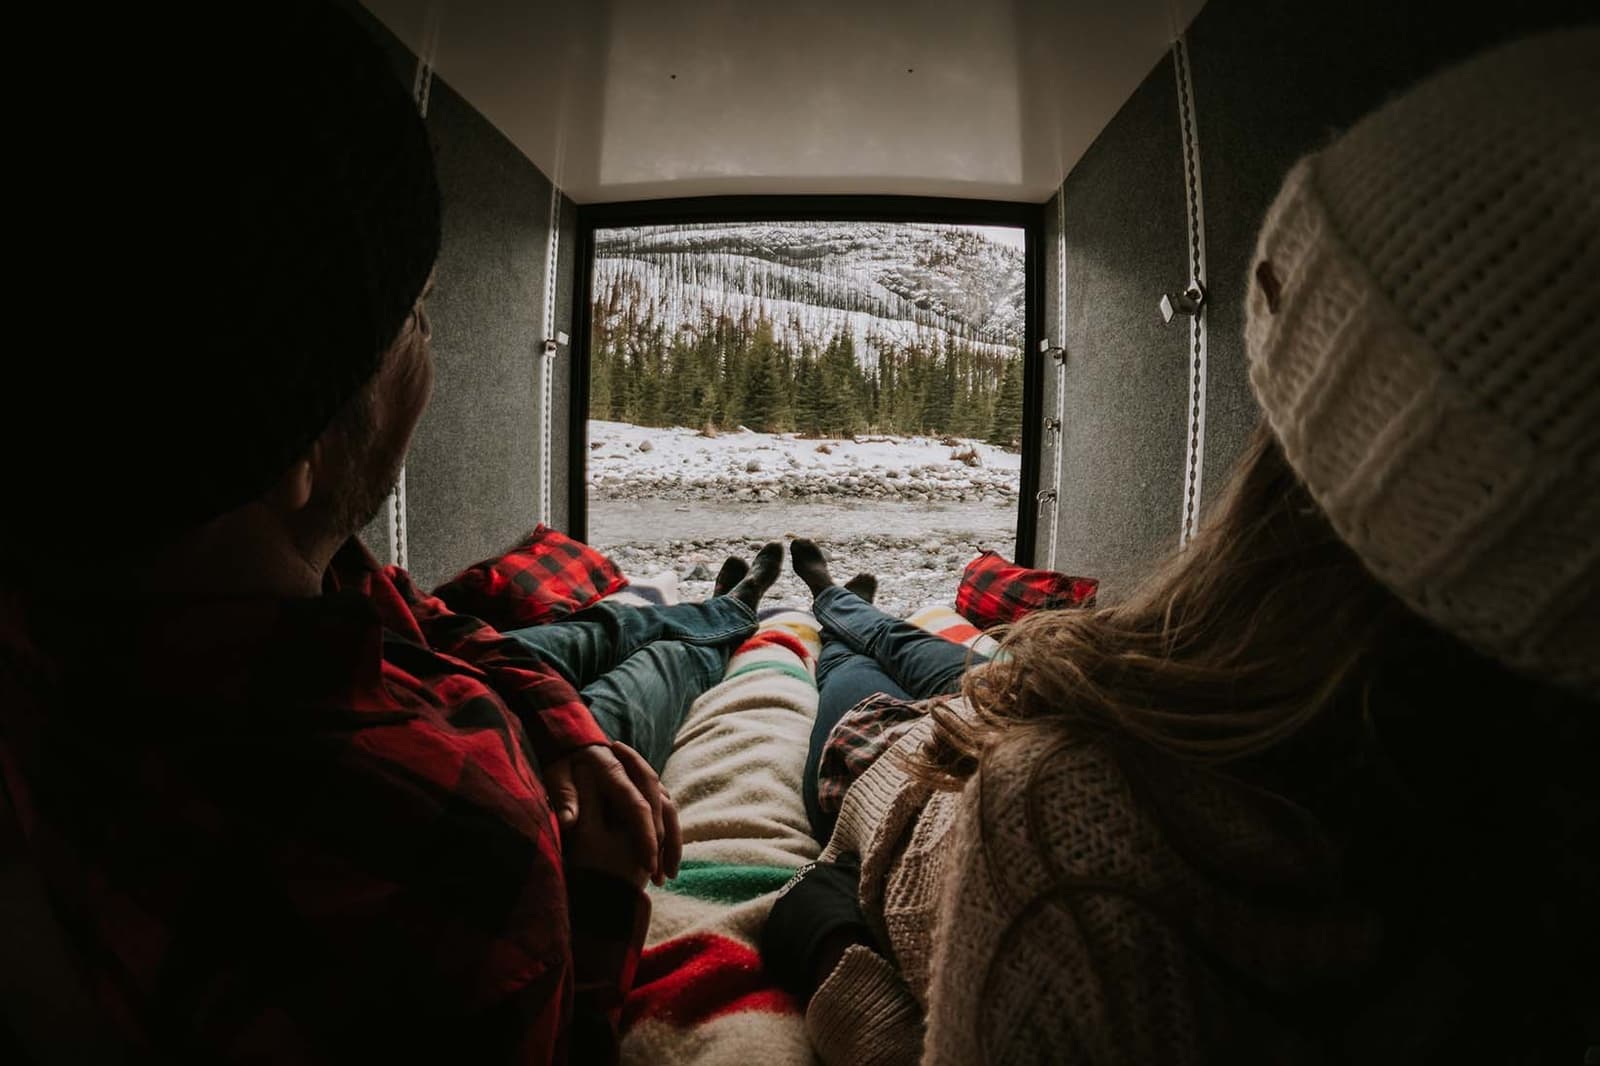 A man and woman wearing toques are reclined side-by-side inside their overland trailer. They are looking out the open door at a spectacular rocky winter landscape. An icy river separates them from evergreens and nearby mountains.